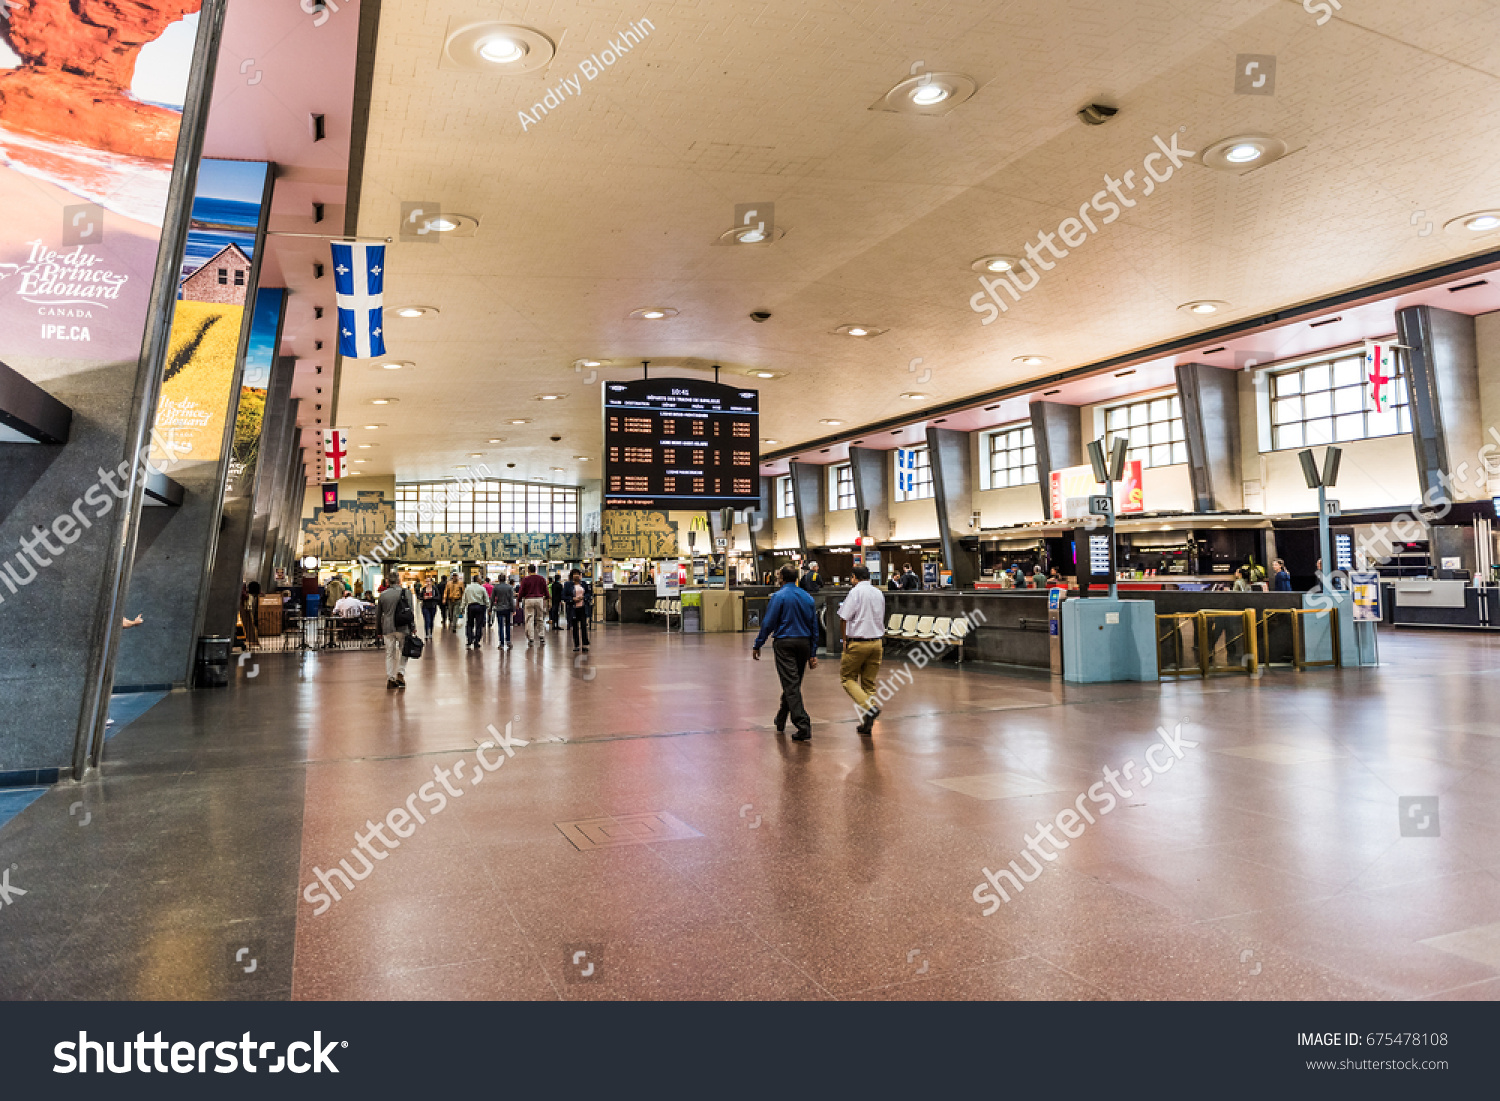 Stock Photo Montreal Canada May Underground City In Quebec Region With Train Station Via Rail And 675478108 